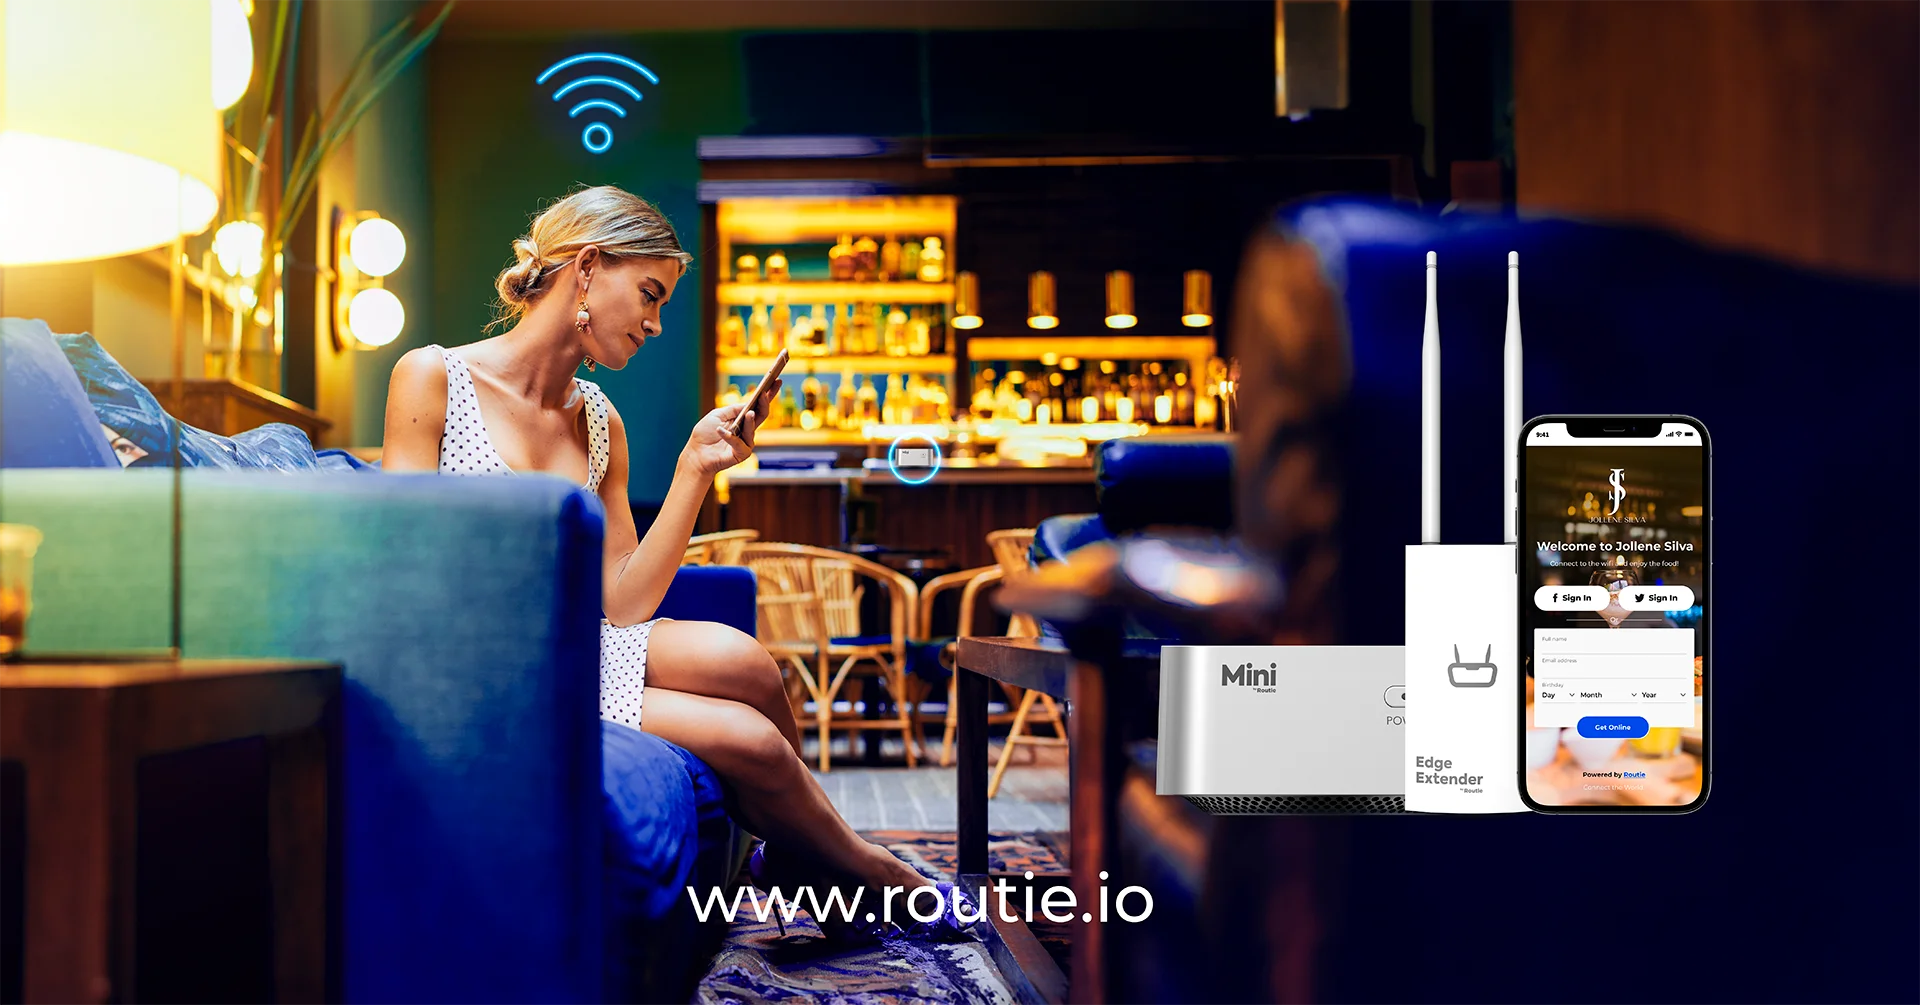 Nightclub Captive Portals: Ensuring Guest Wifi Privacy and Security